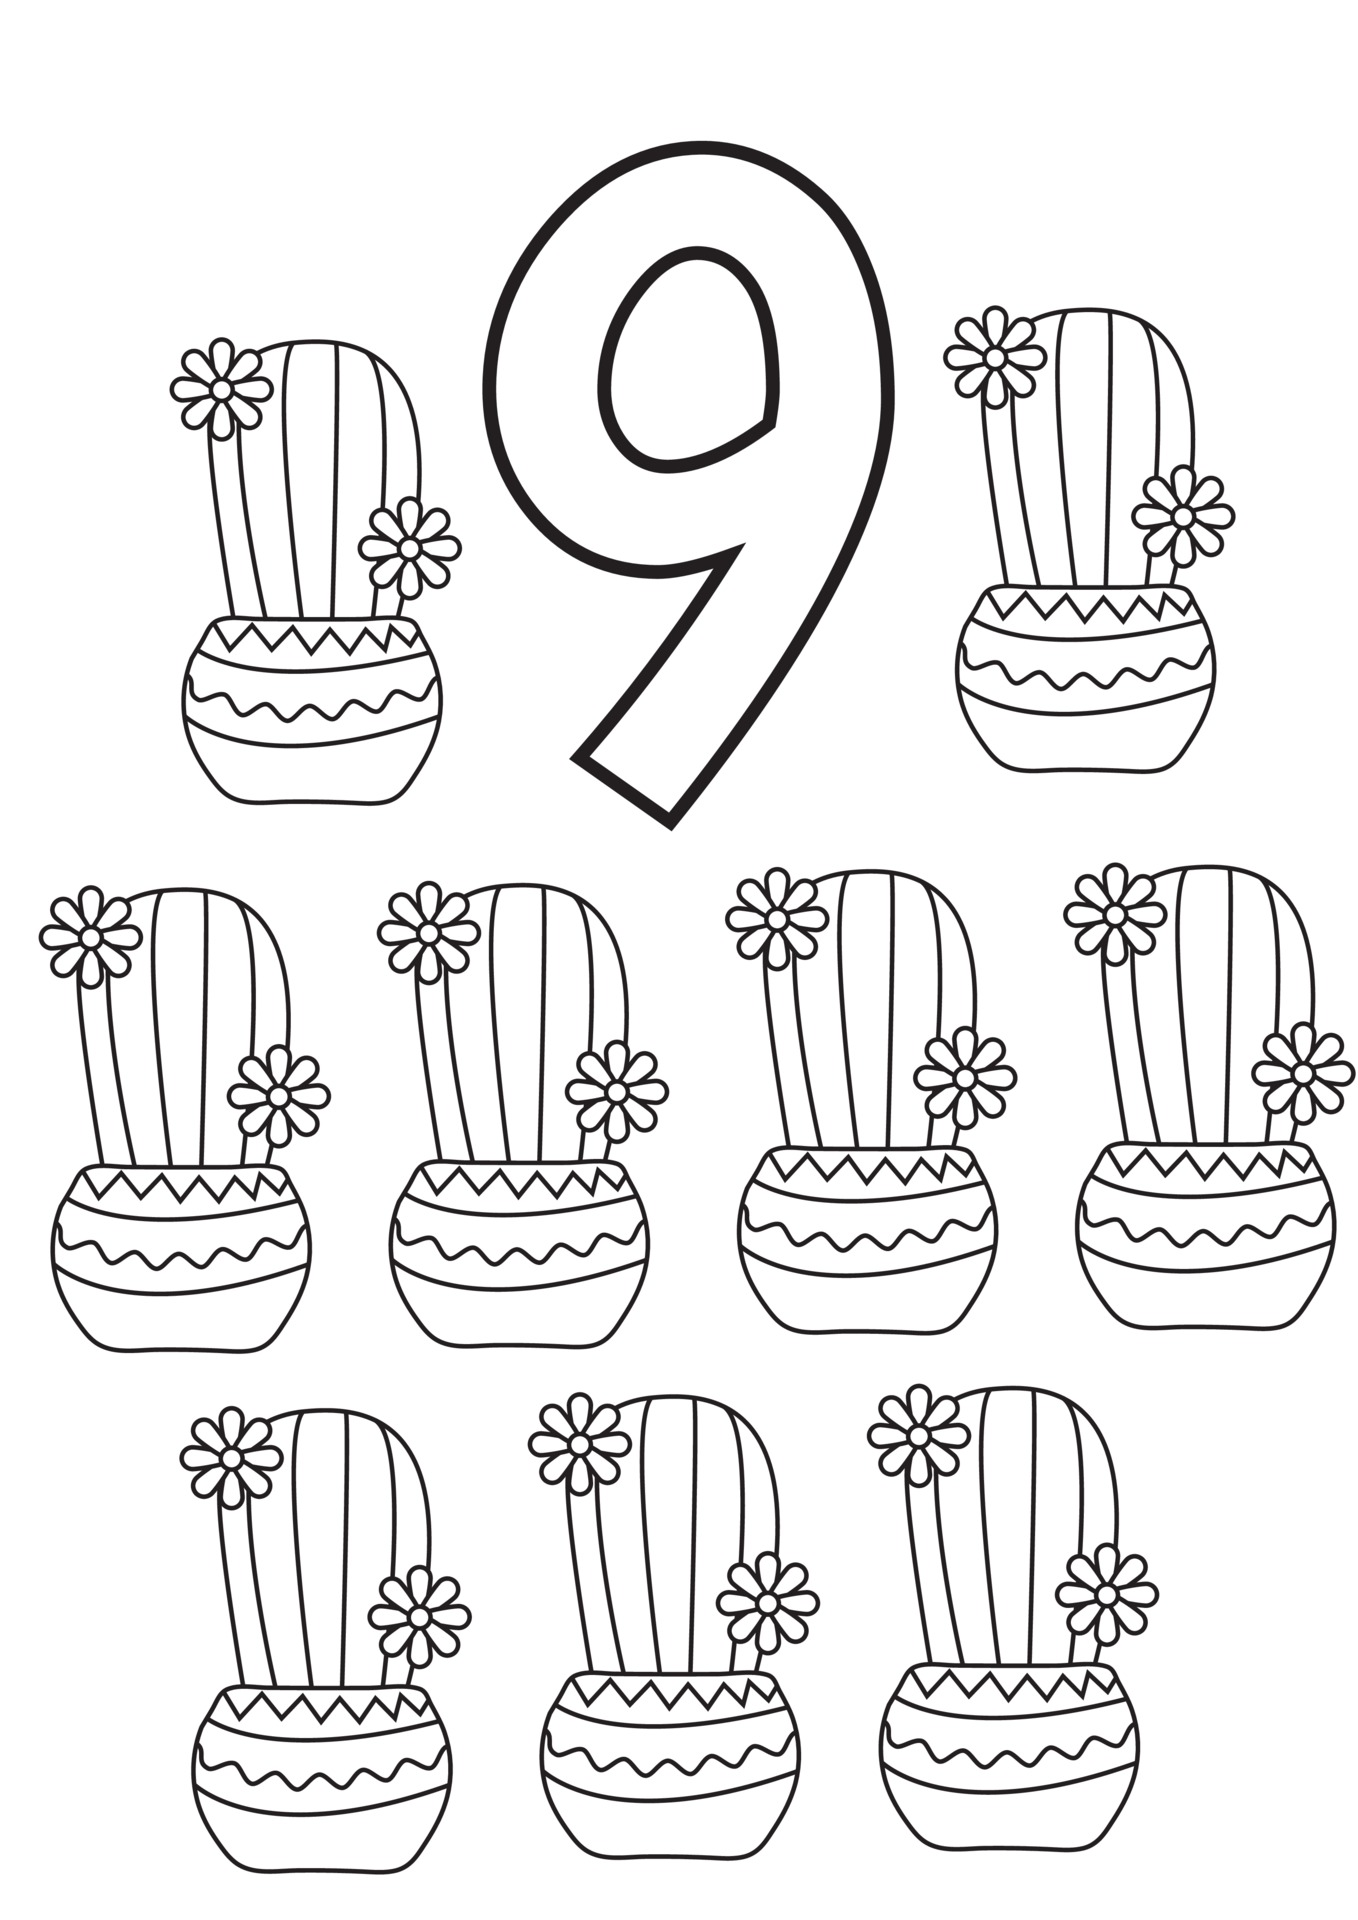 numbers coloring pages printable